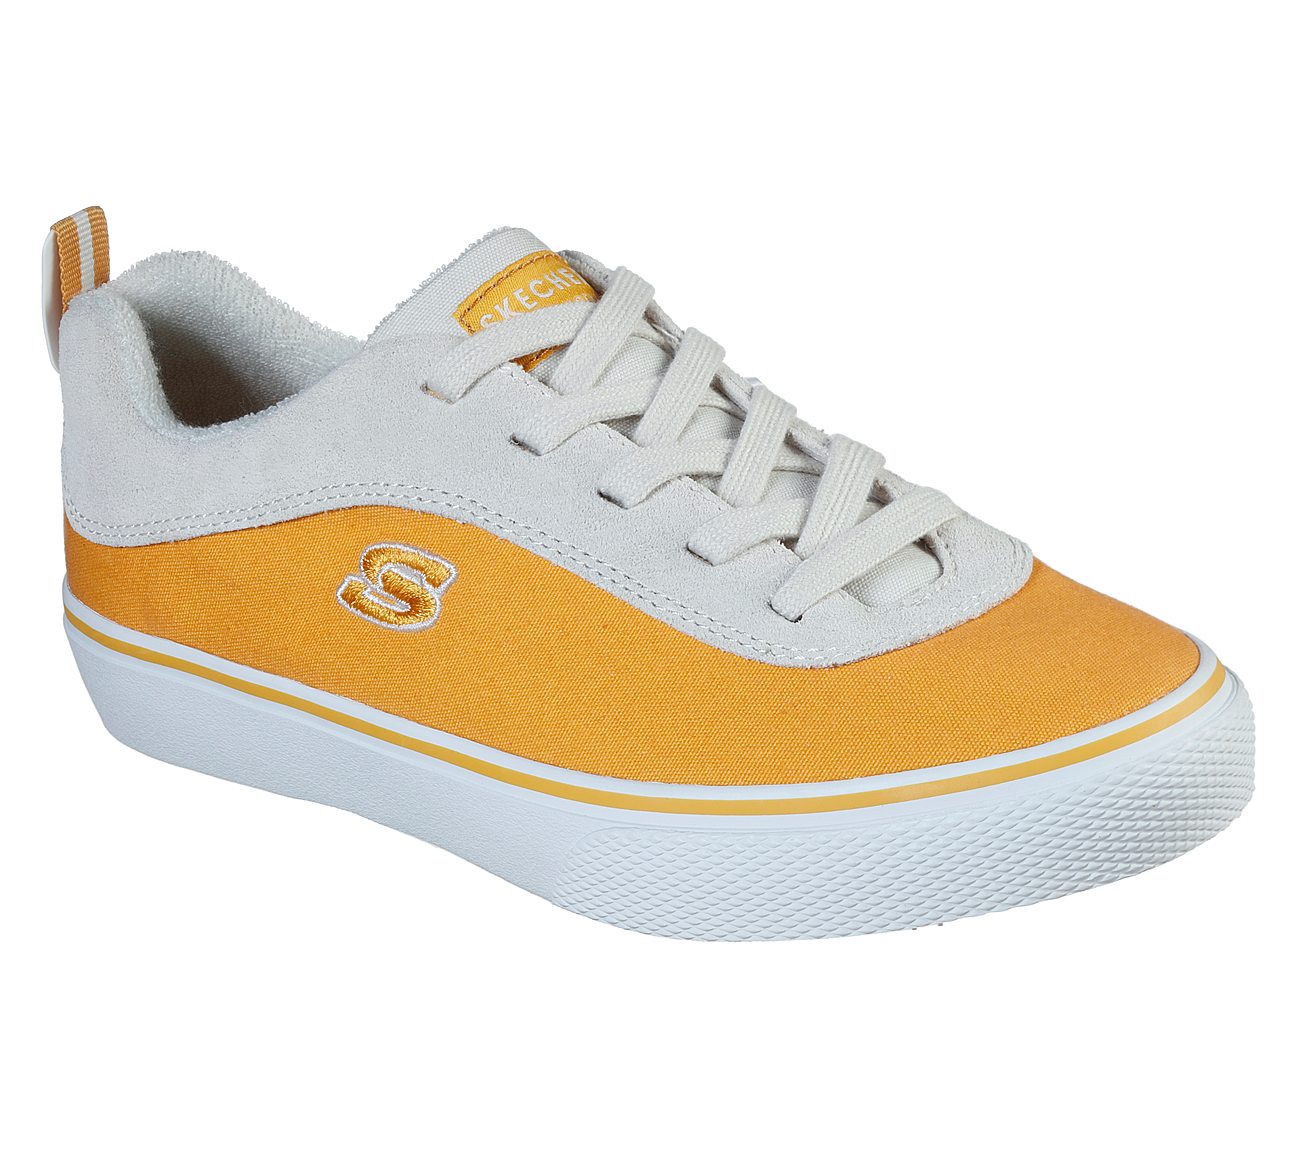 V'LITES-GET AROUND, YELLOW Footwear Lateral View